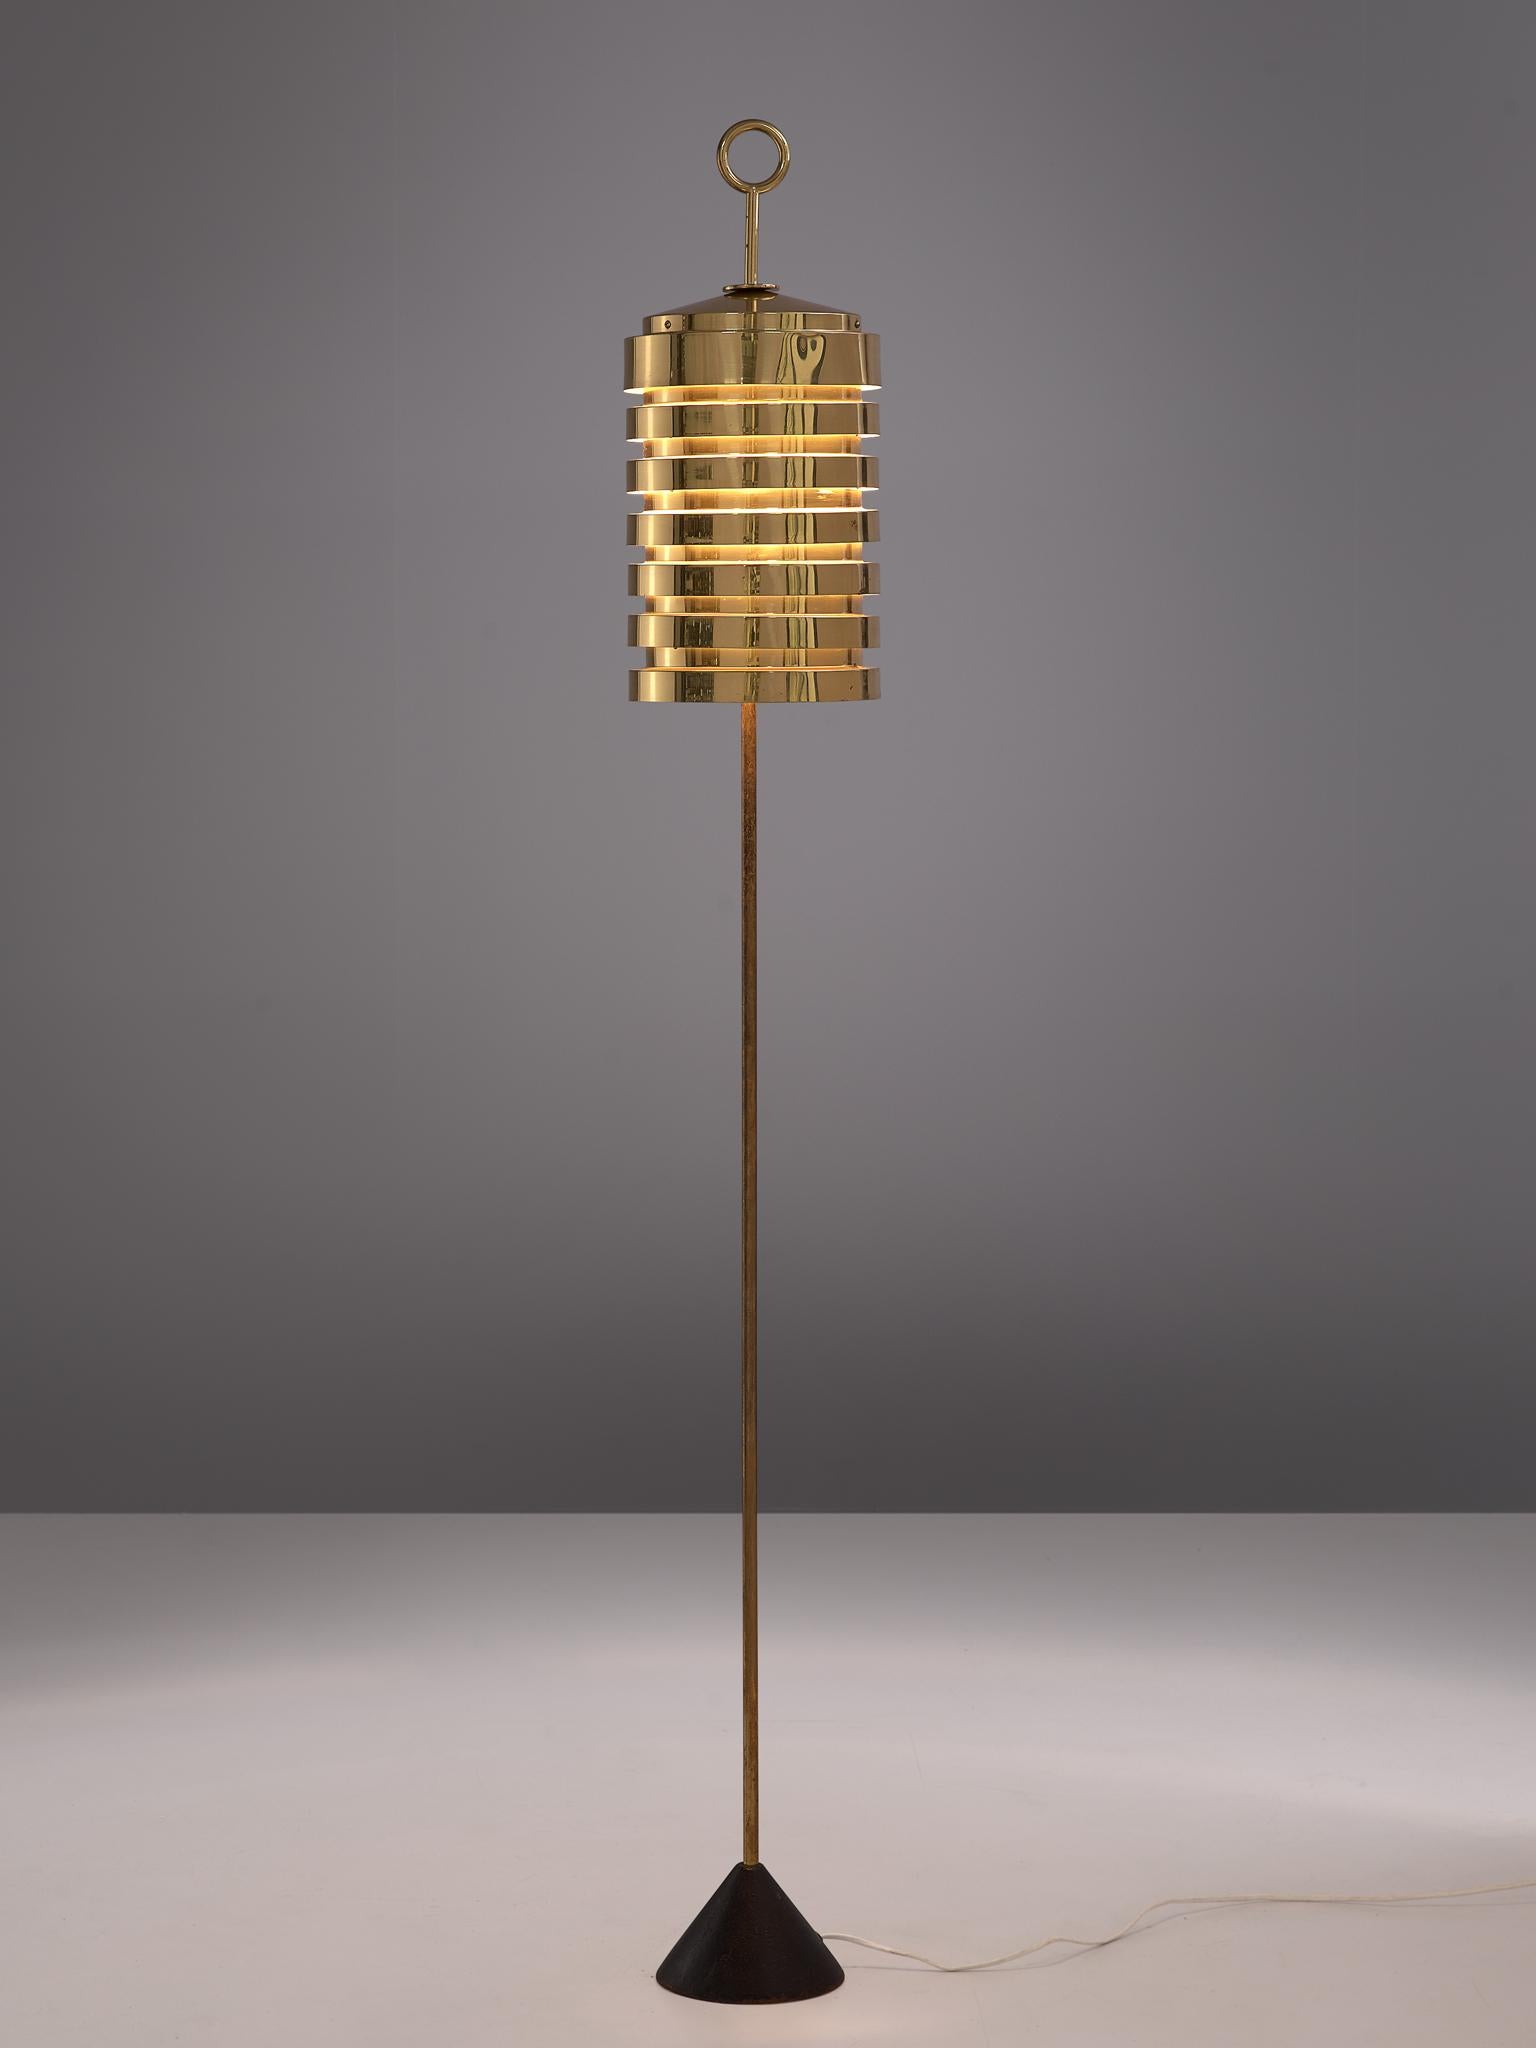 Hans Agne Jakobsson for AB Markaryd, 'G20' floor lamp, brass and iron, Sweden, 1950s

Brass cylindrical shaped floor lamp designed by the Swedish light designer Hans Agne Jakobsson. The shade consists of several brass layers that creates a